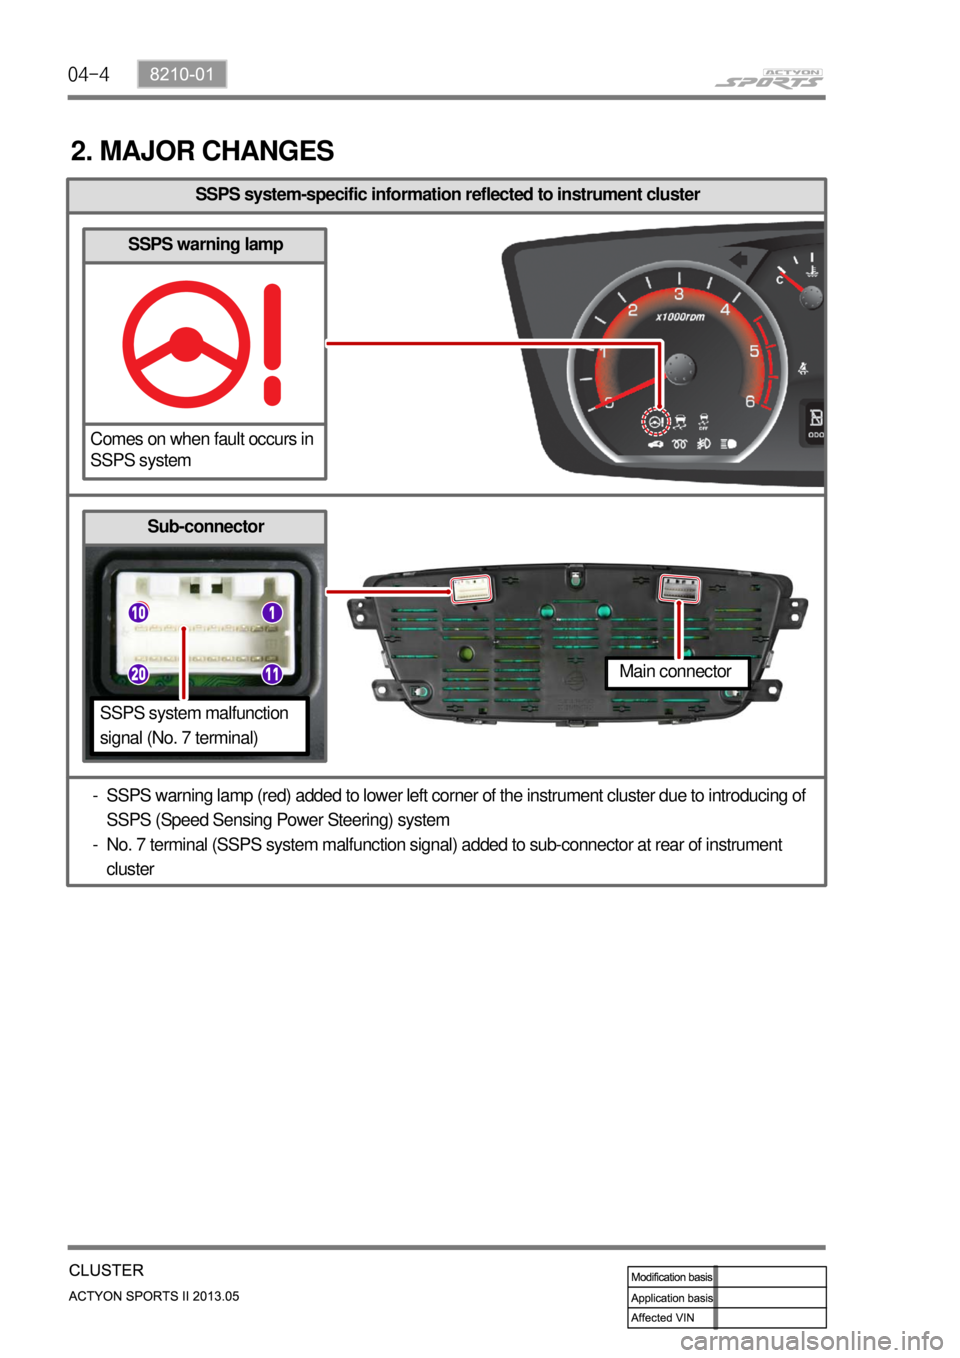 SSANGYONG NEW ACTYON SPORTS 2013  Service Manual 04-4
SSPS system-specific information reflected to instrument cluster
2. MAJOR CHANGES
SSPS warning lamp (red) added to lower left corner of the instrument cluster due to introducing of 
SSPS (Speed S